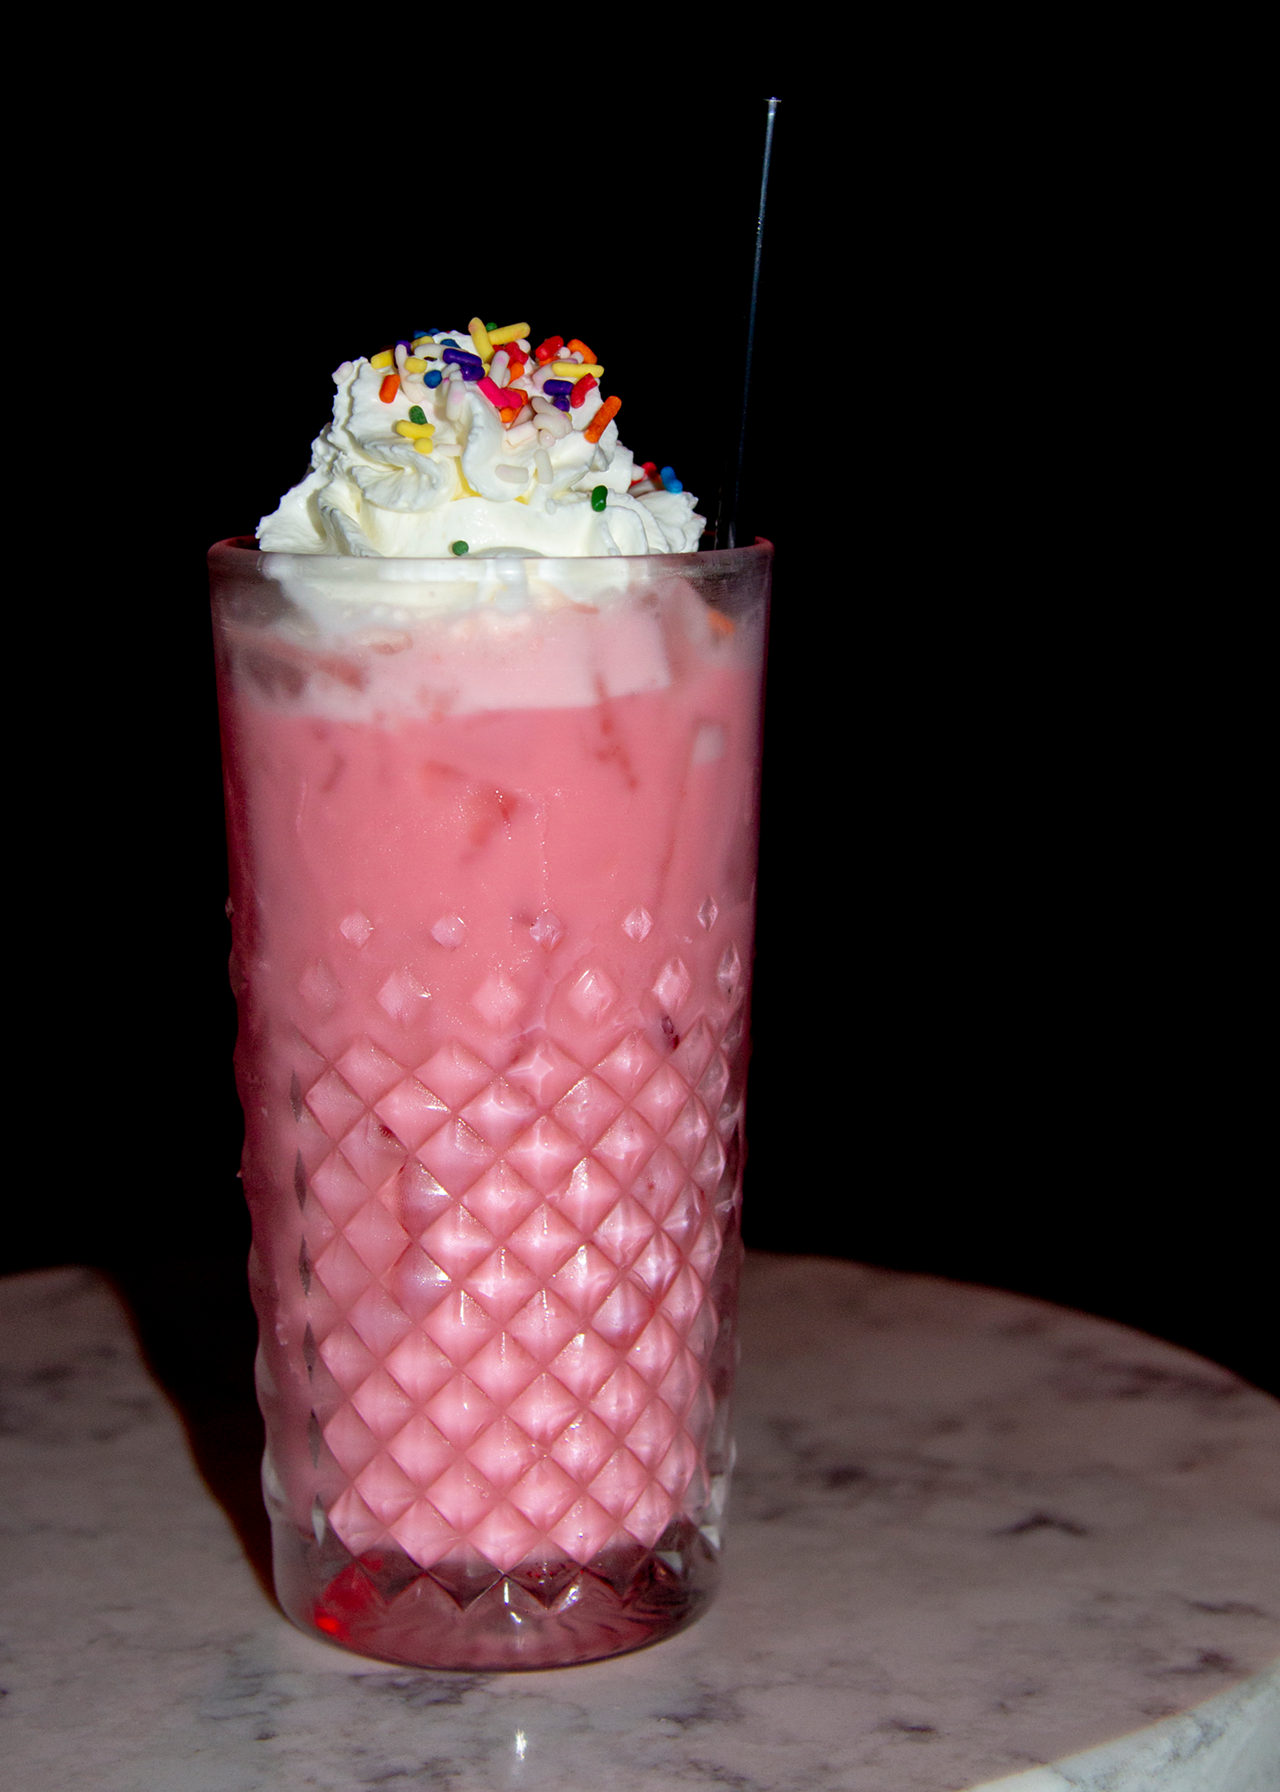 The Video Archive (965 E. McMillan Road, East Walnut Hills) is a nostalgic movie store that doubles as a speakeasy. Jason Keeney, general manager, says all drinks are inspired by Quentin Tarantino films, including the famous $5 milkshakes (vanilla, chocolate and strawberry). Pictured is a strawberry milkshake spiked with bourbon, milk, strawberry syrup and house-made bourbon whipped cream.